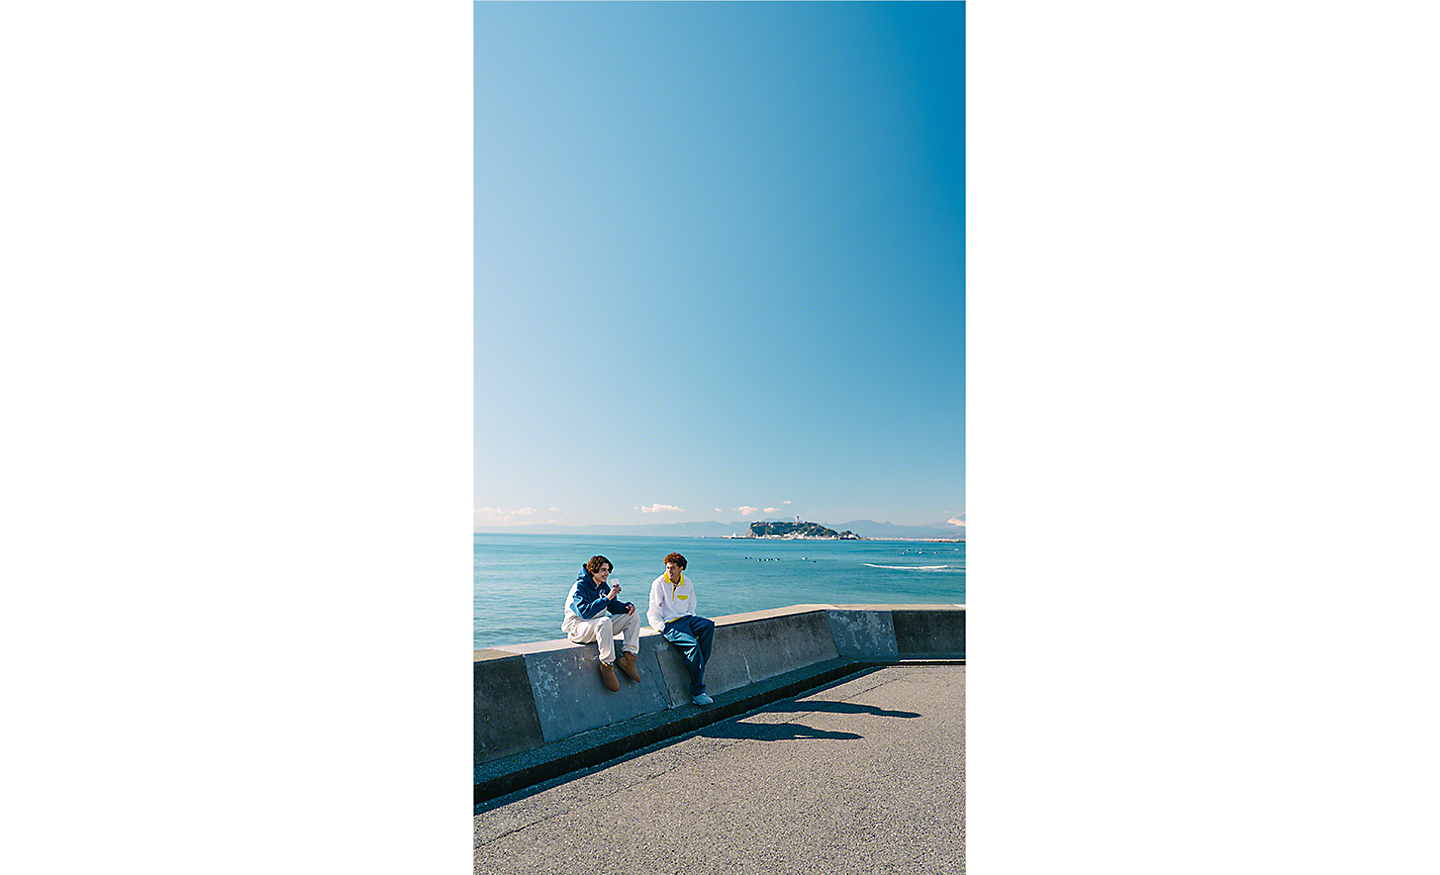 Two people sitting on a low wall in front of an expansive ocean view